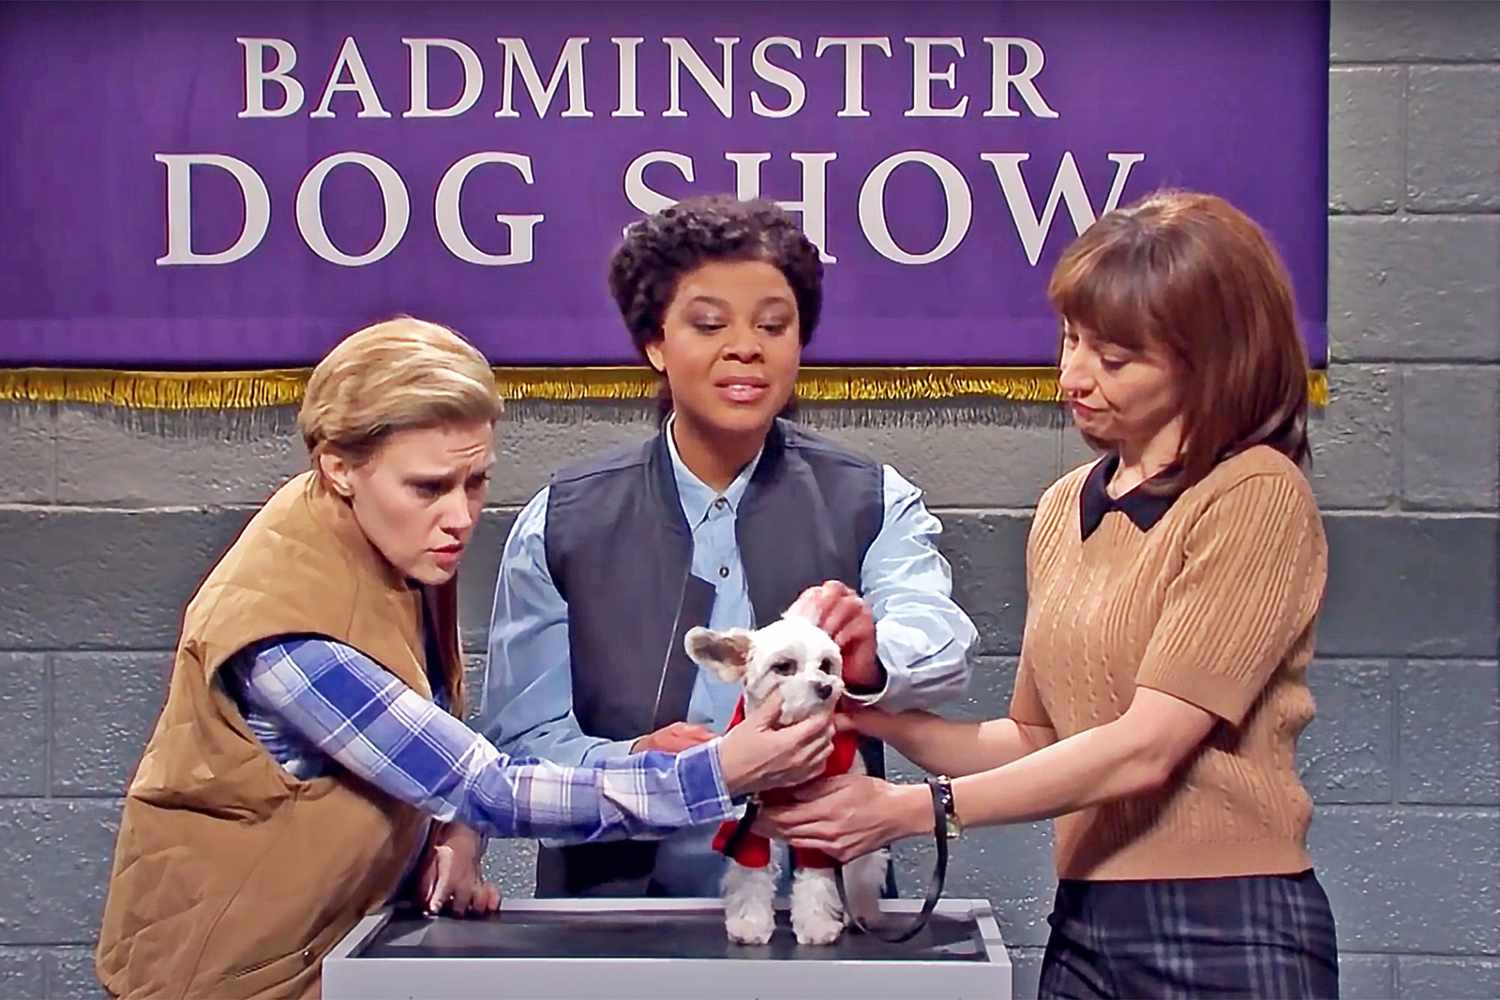 badminster judges looking over small white dog in snl skit